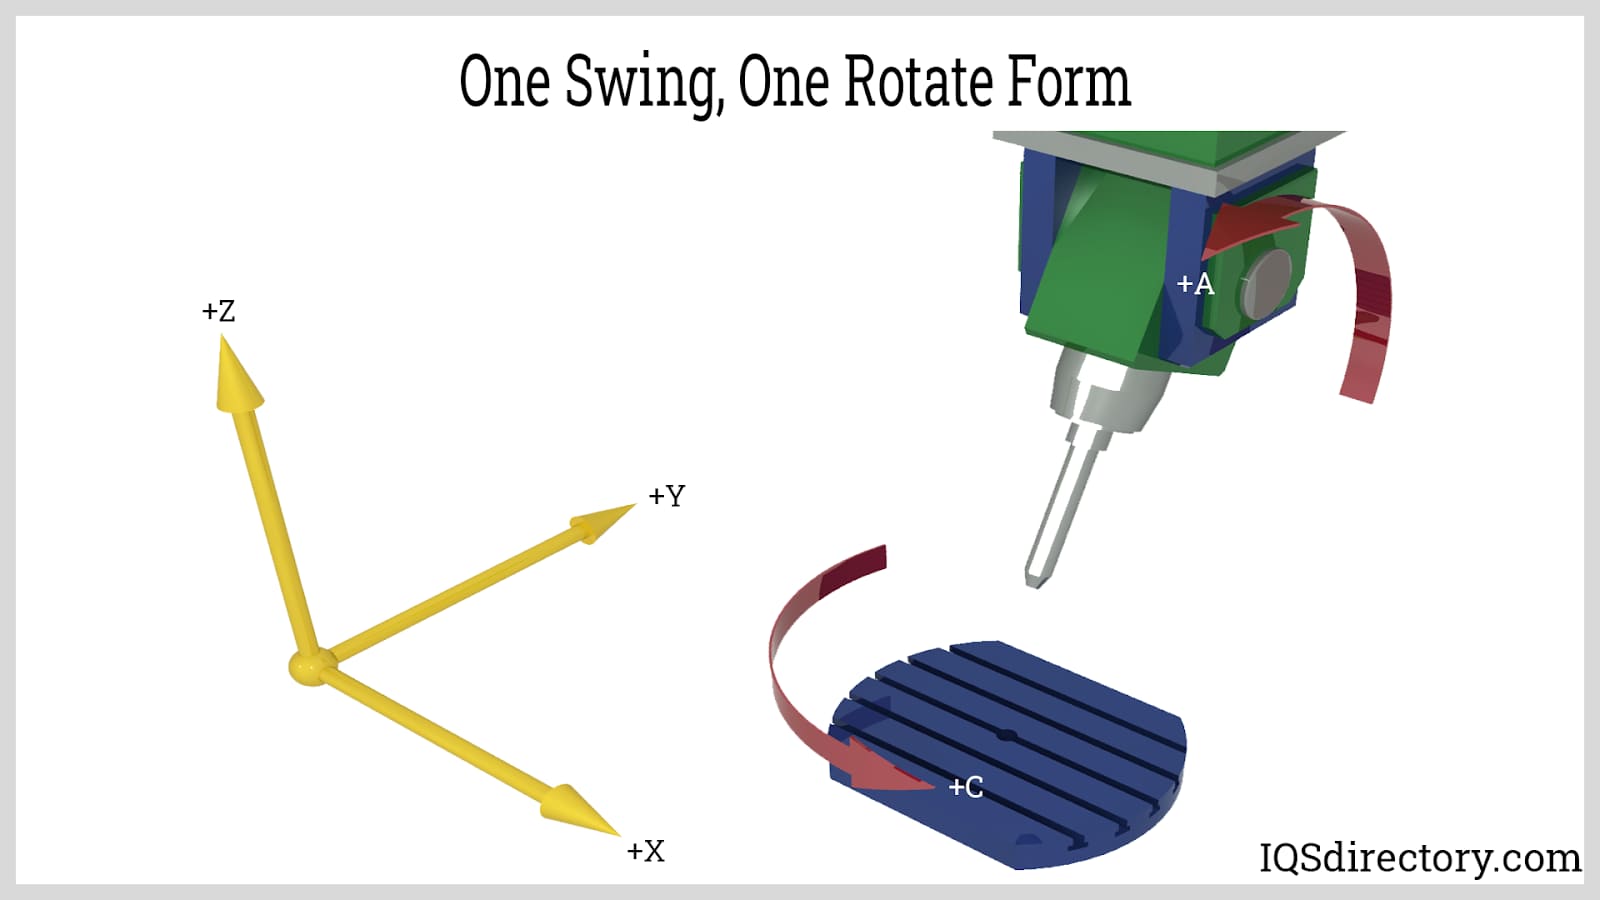 One Swing, One Rotate Form